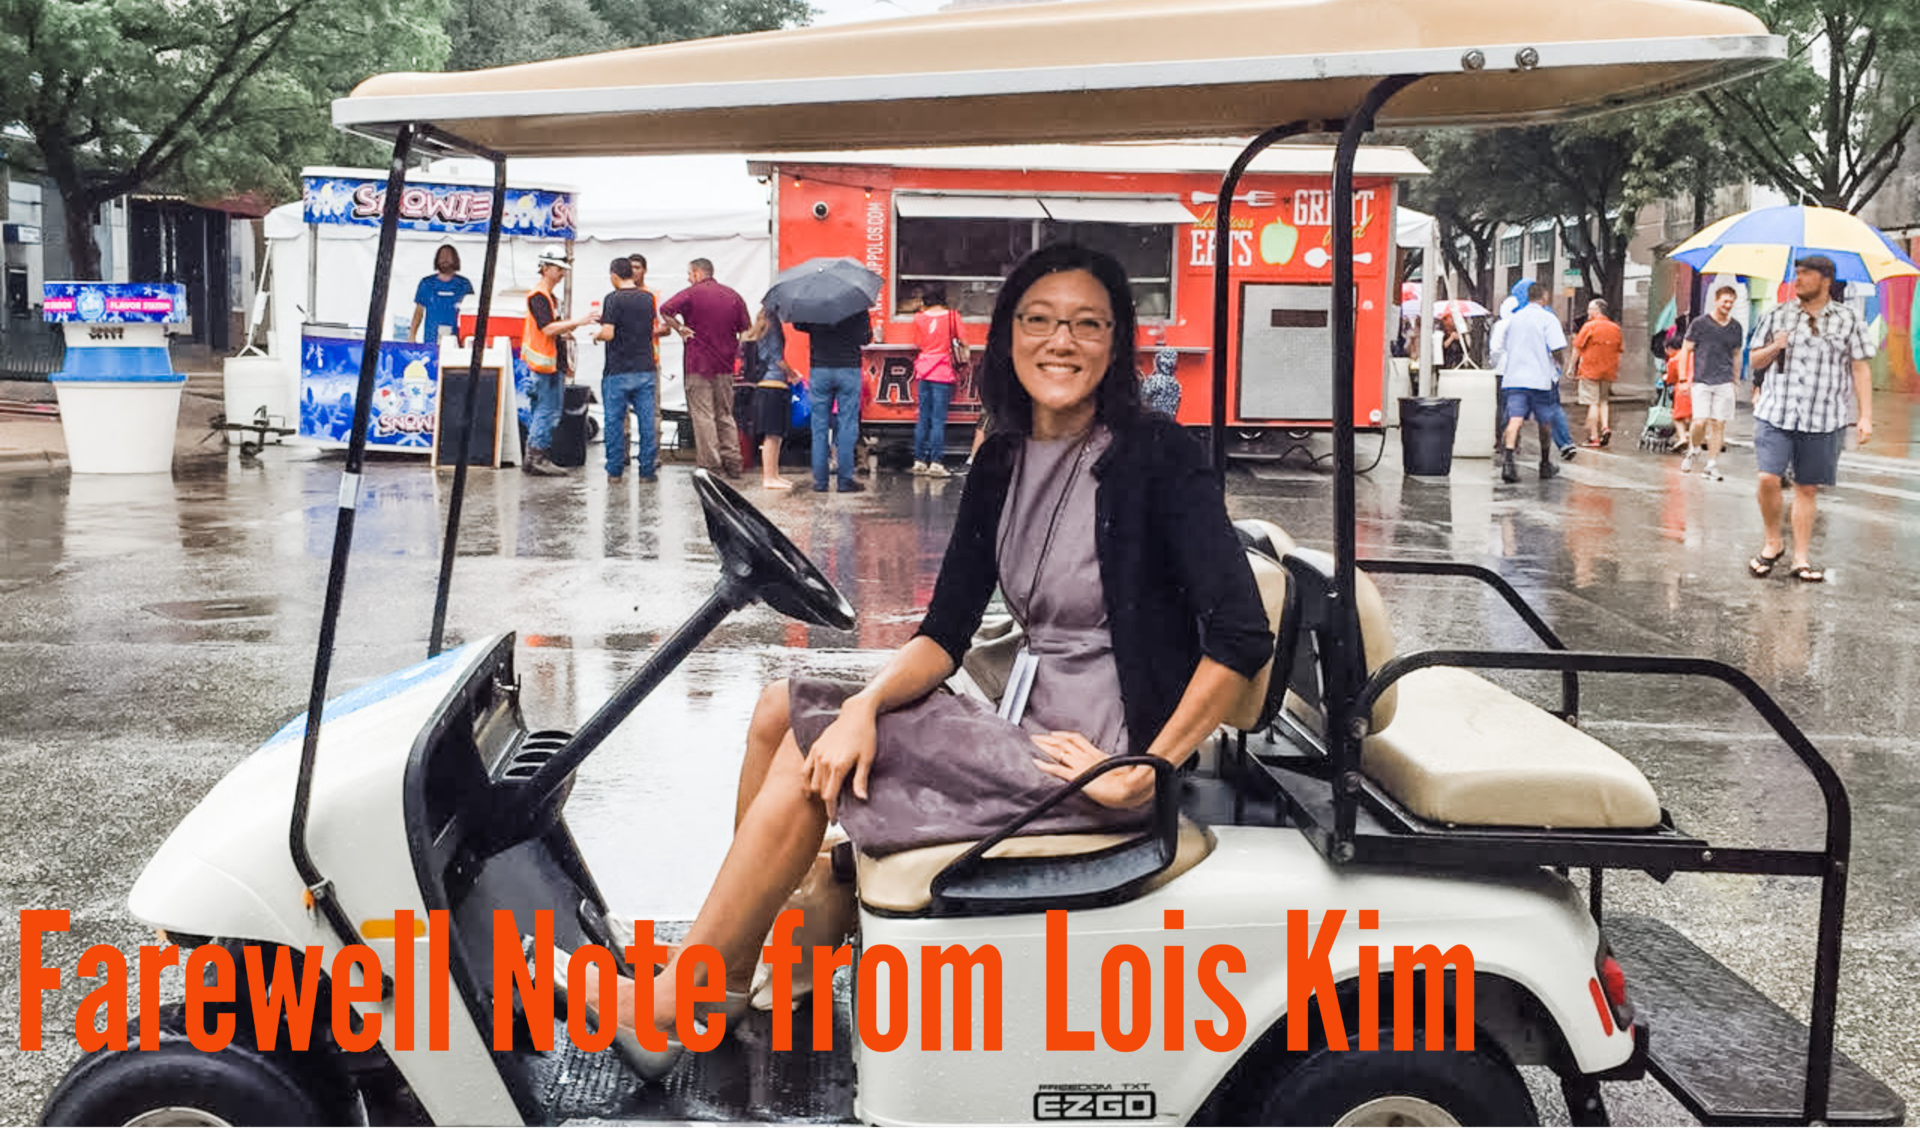 A farewell note and invitation from departing Executive Director, Lois Kim